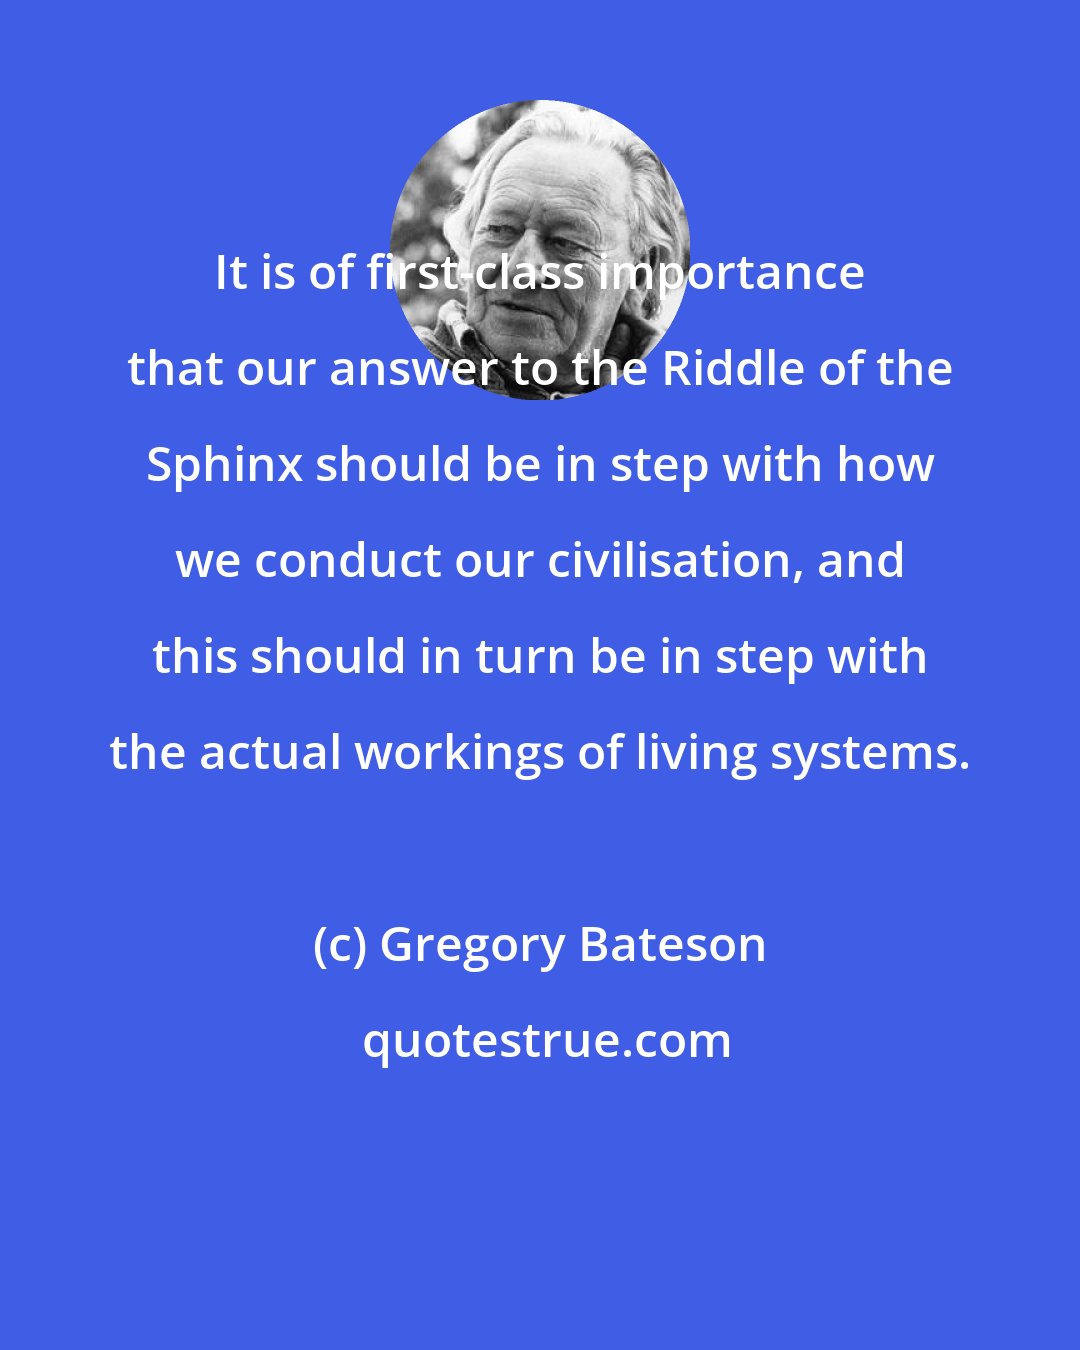 Gregory Bateson: It is of first-class importance that our answer to the Riddle of the Sphinx should be in step with how we conduct our civilisation, and this should in turn be in step with the actual workings of living systems.